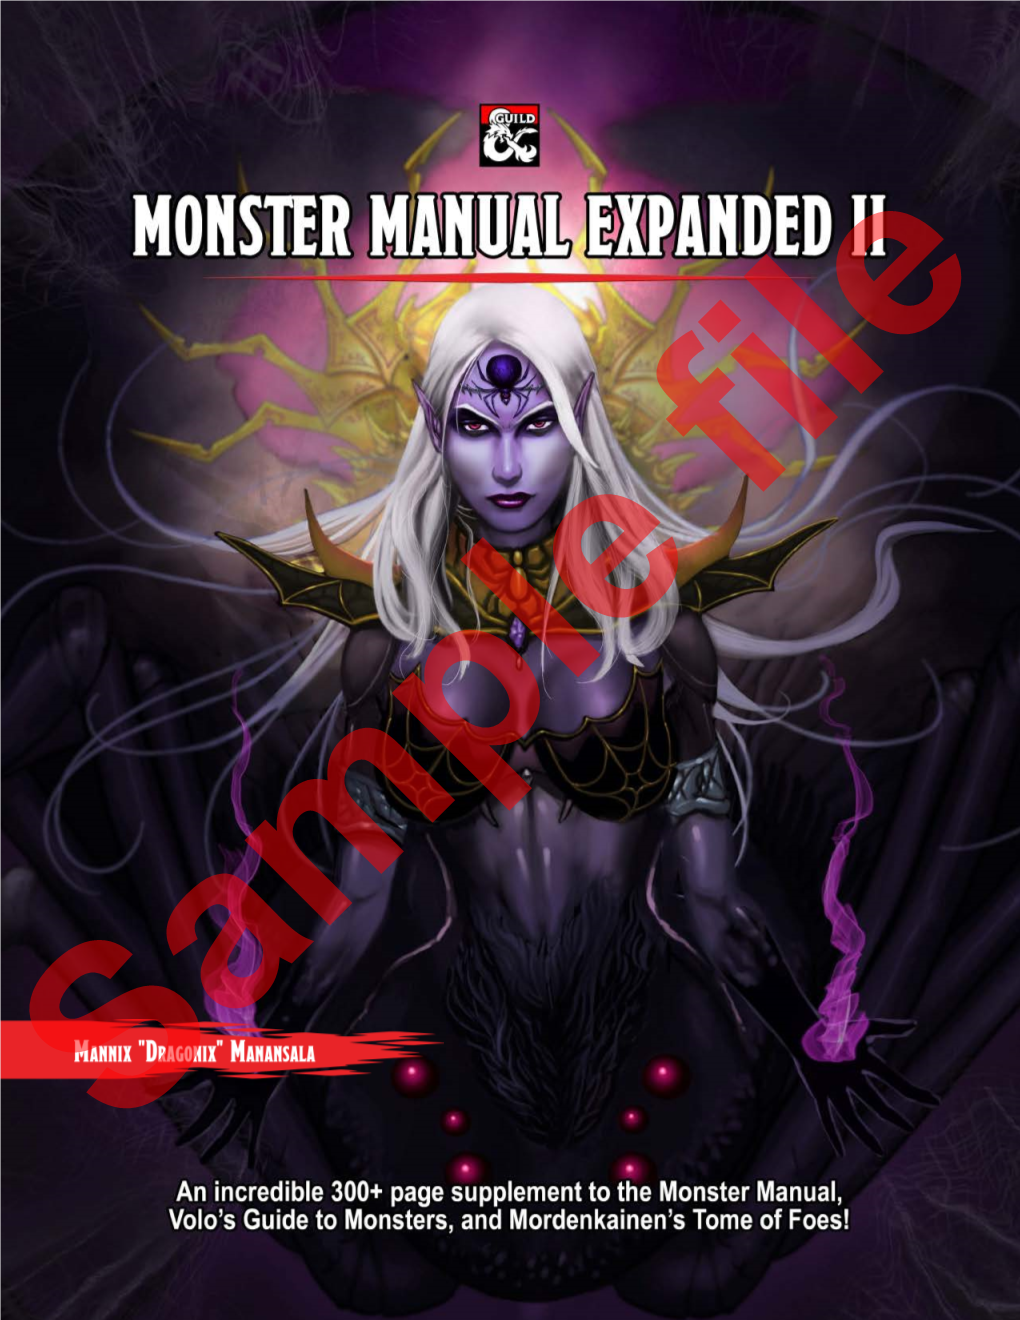 Monster Manual Expanded II